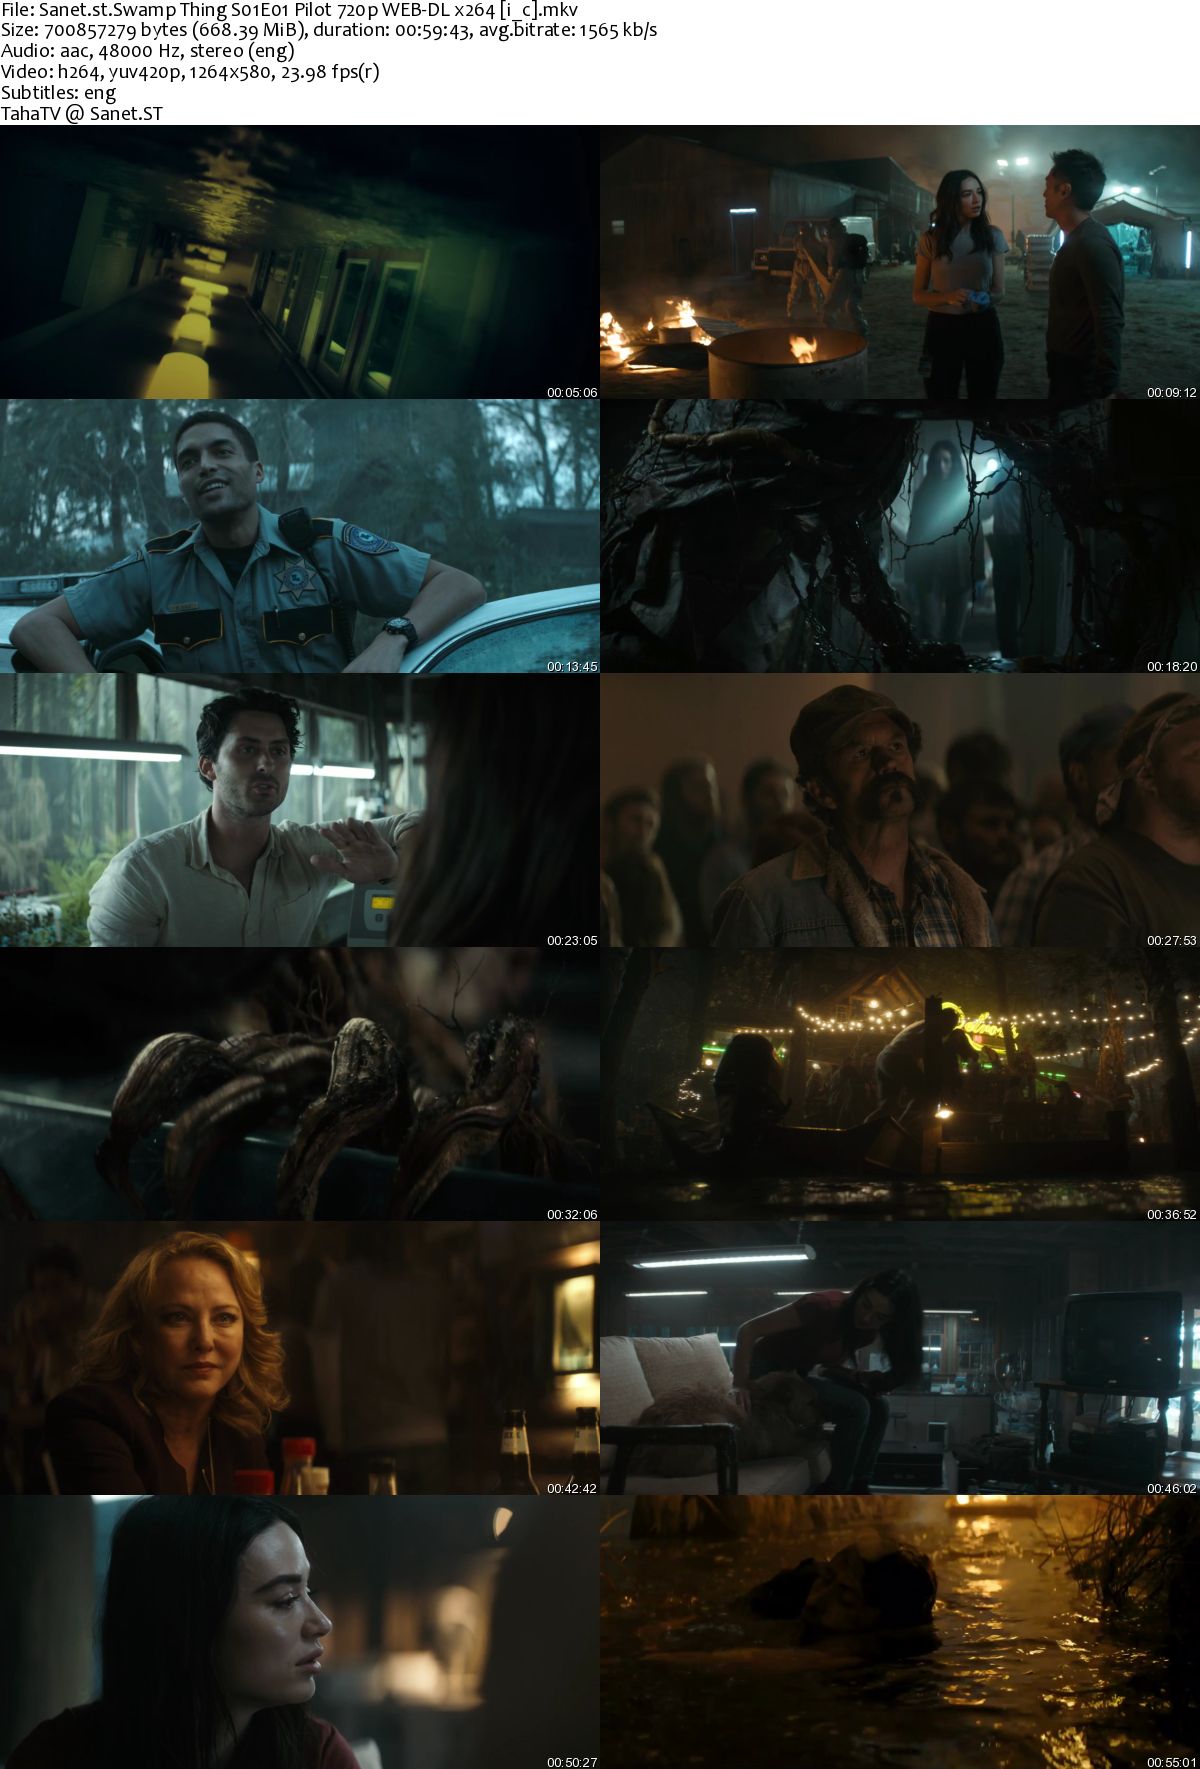 Swamp Thing 2019 S01 720p WEB-DL x264 [i_c] - SoftArchive